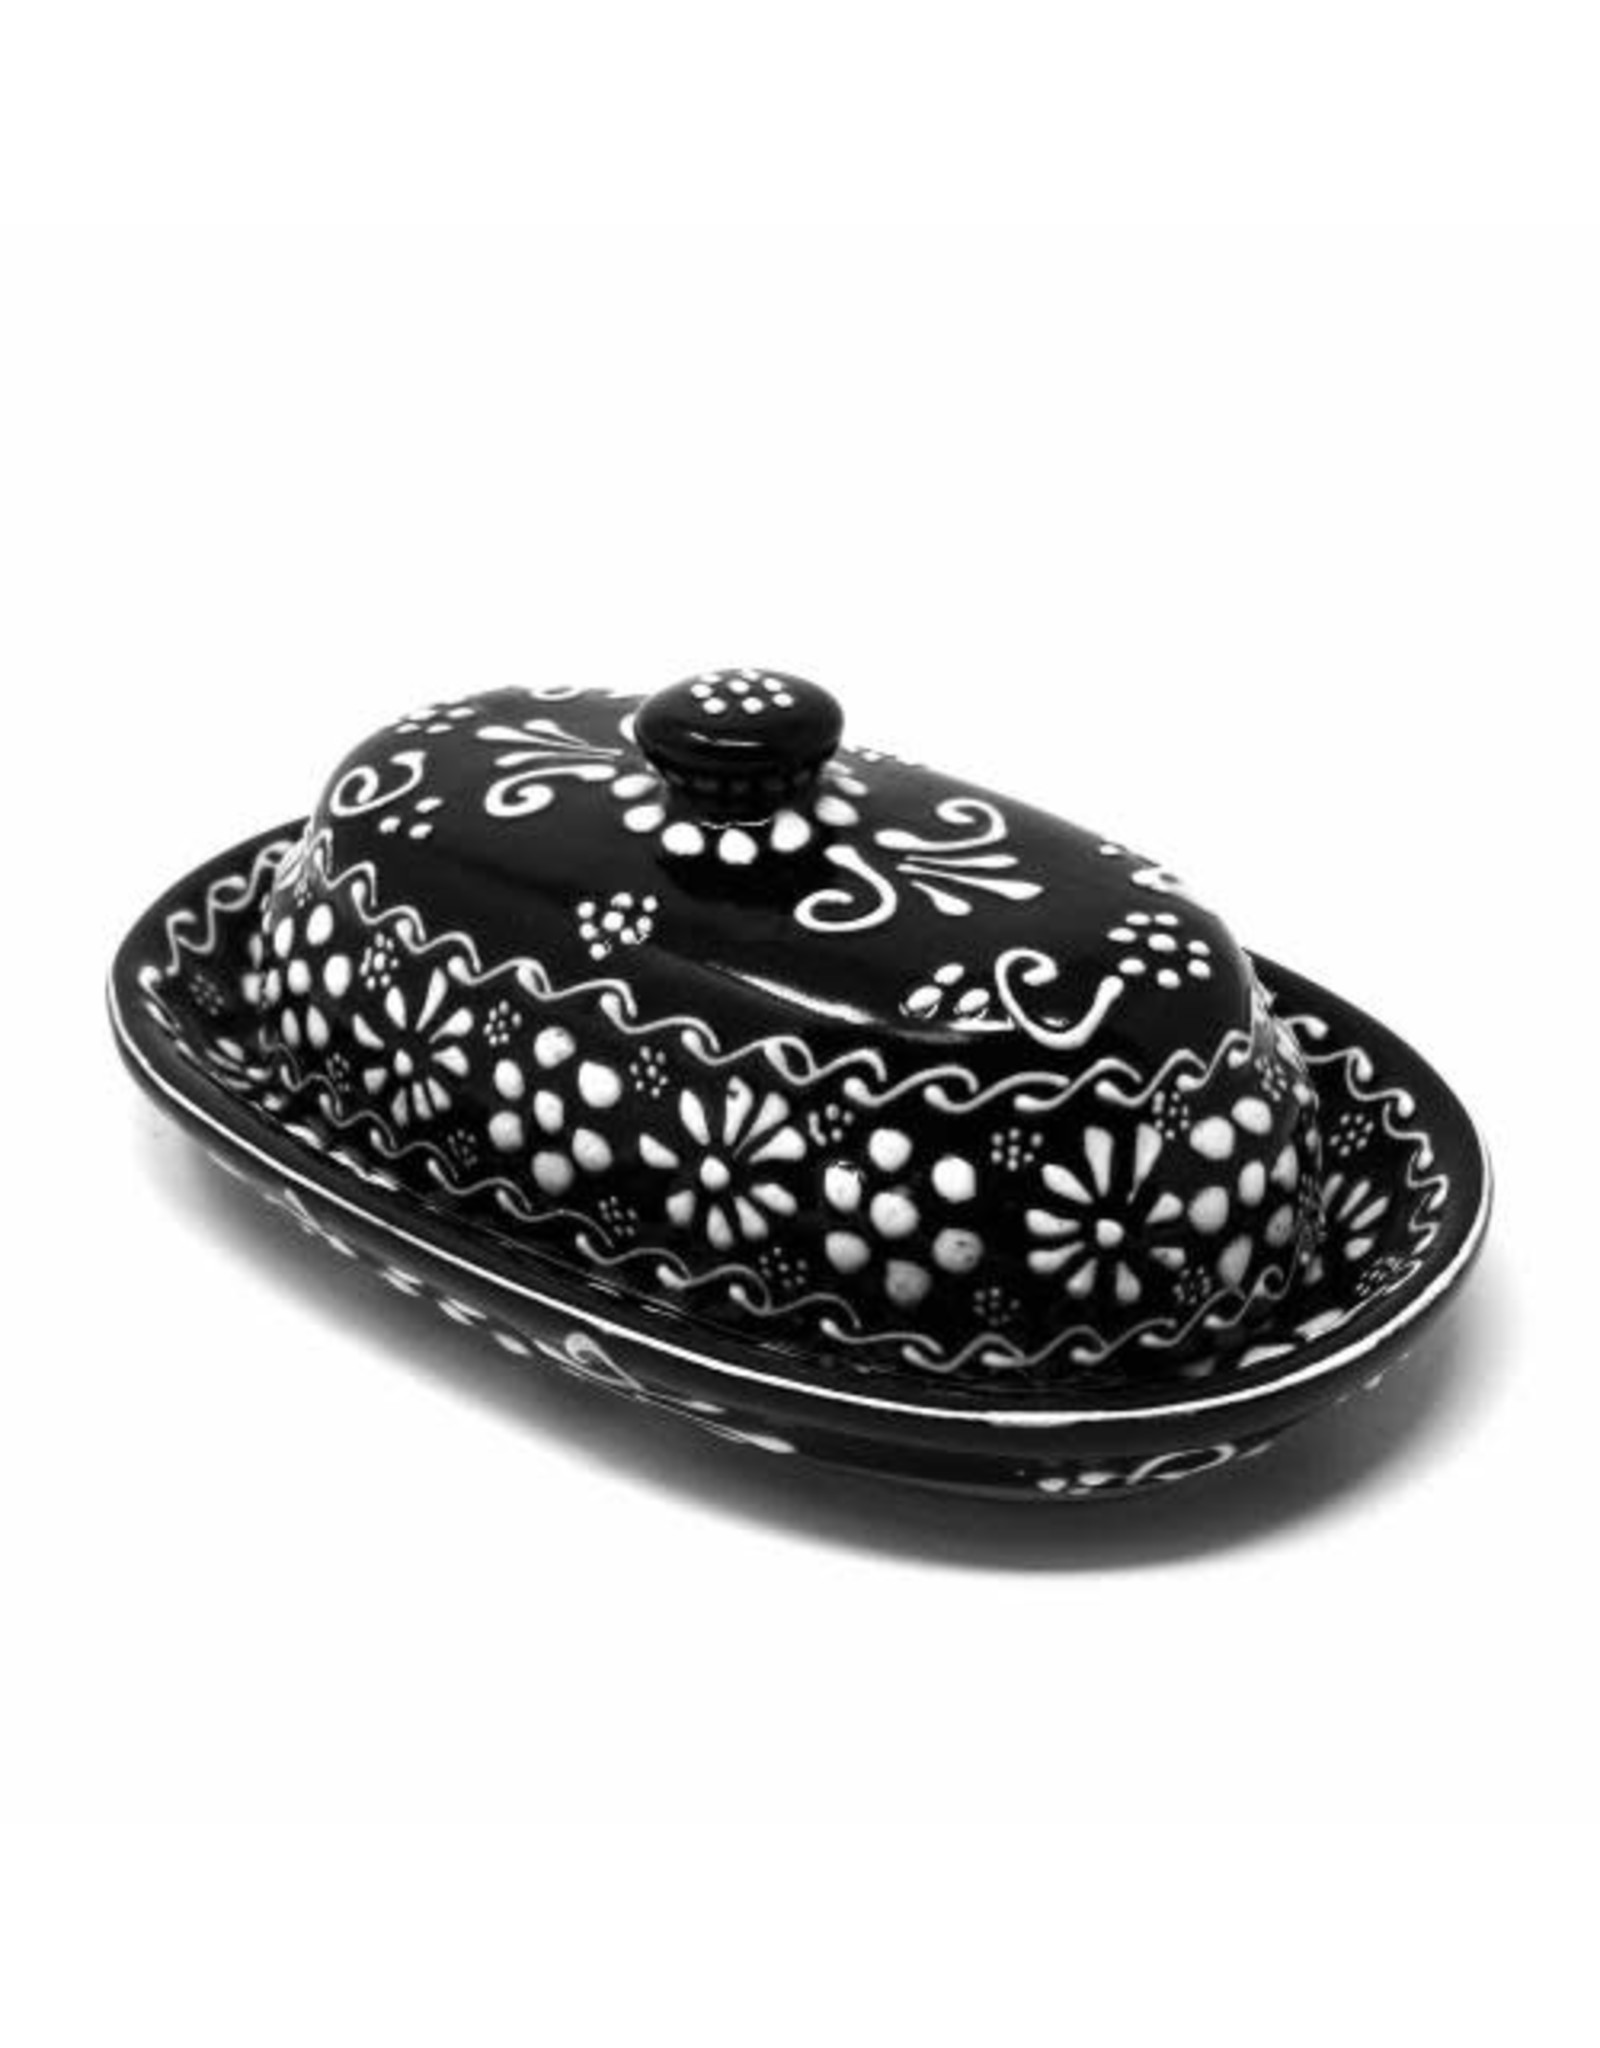 Trade roots Butter Dish, Ink, Mexico